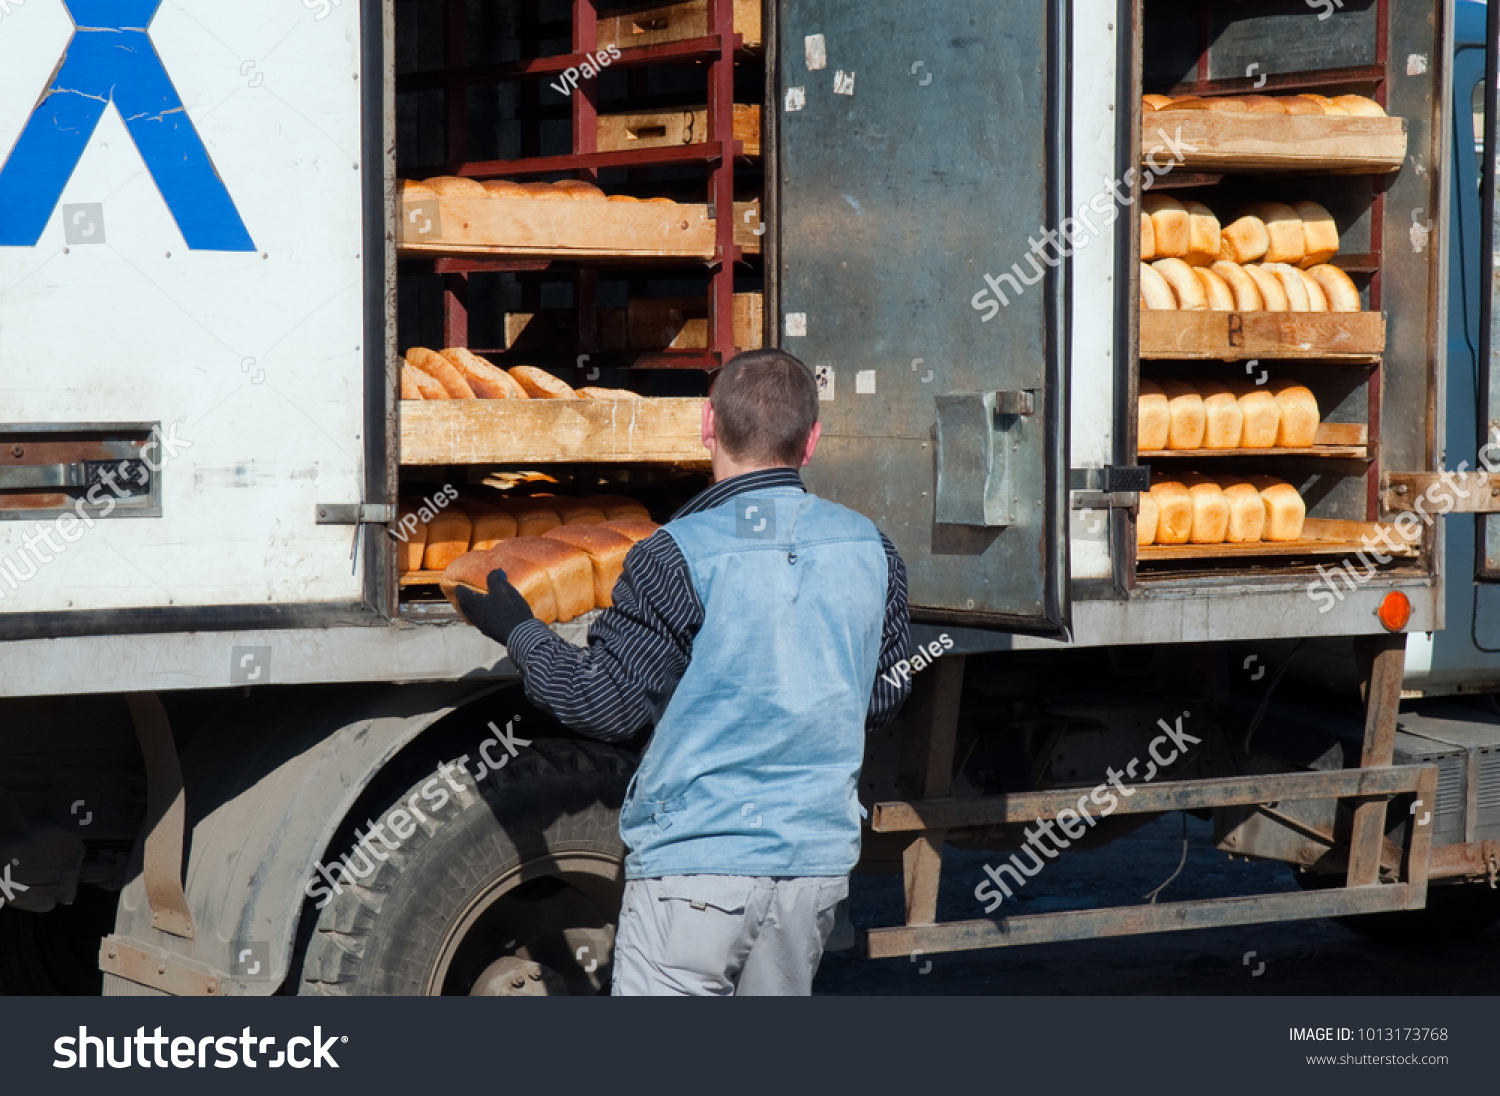 Stock Photo The Worker Unloads Fresh Bread From The Truck 1013173768 